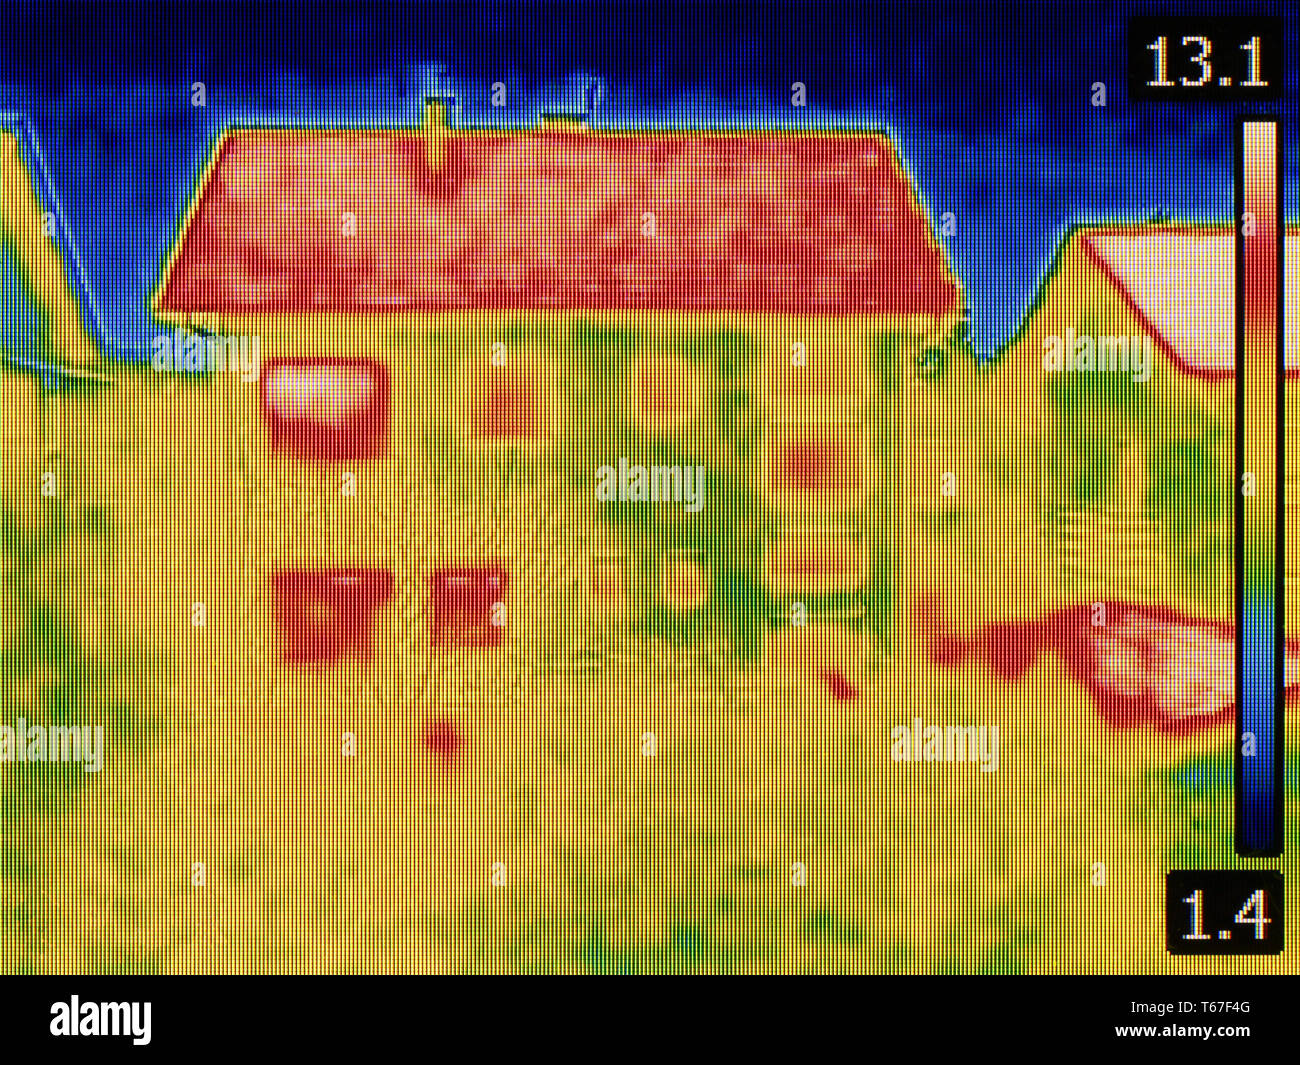 House Thermal Image Stock Photo